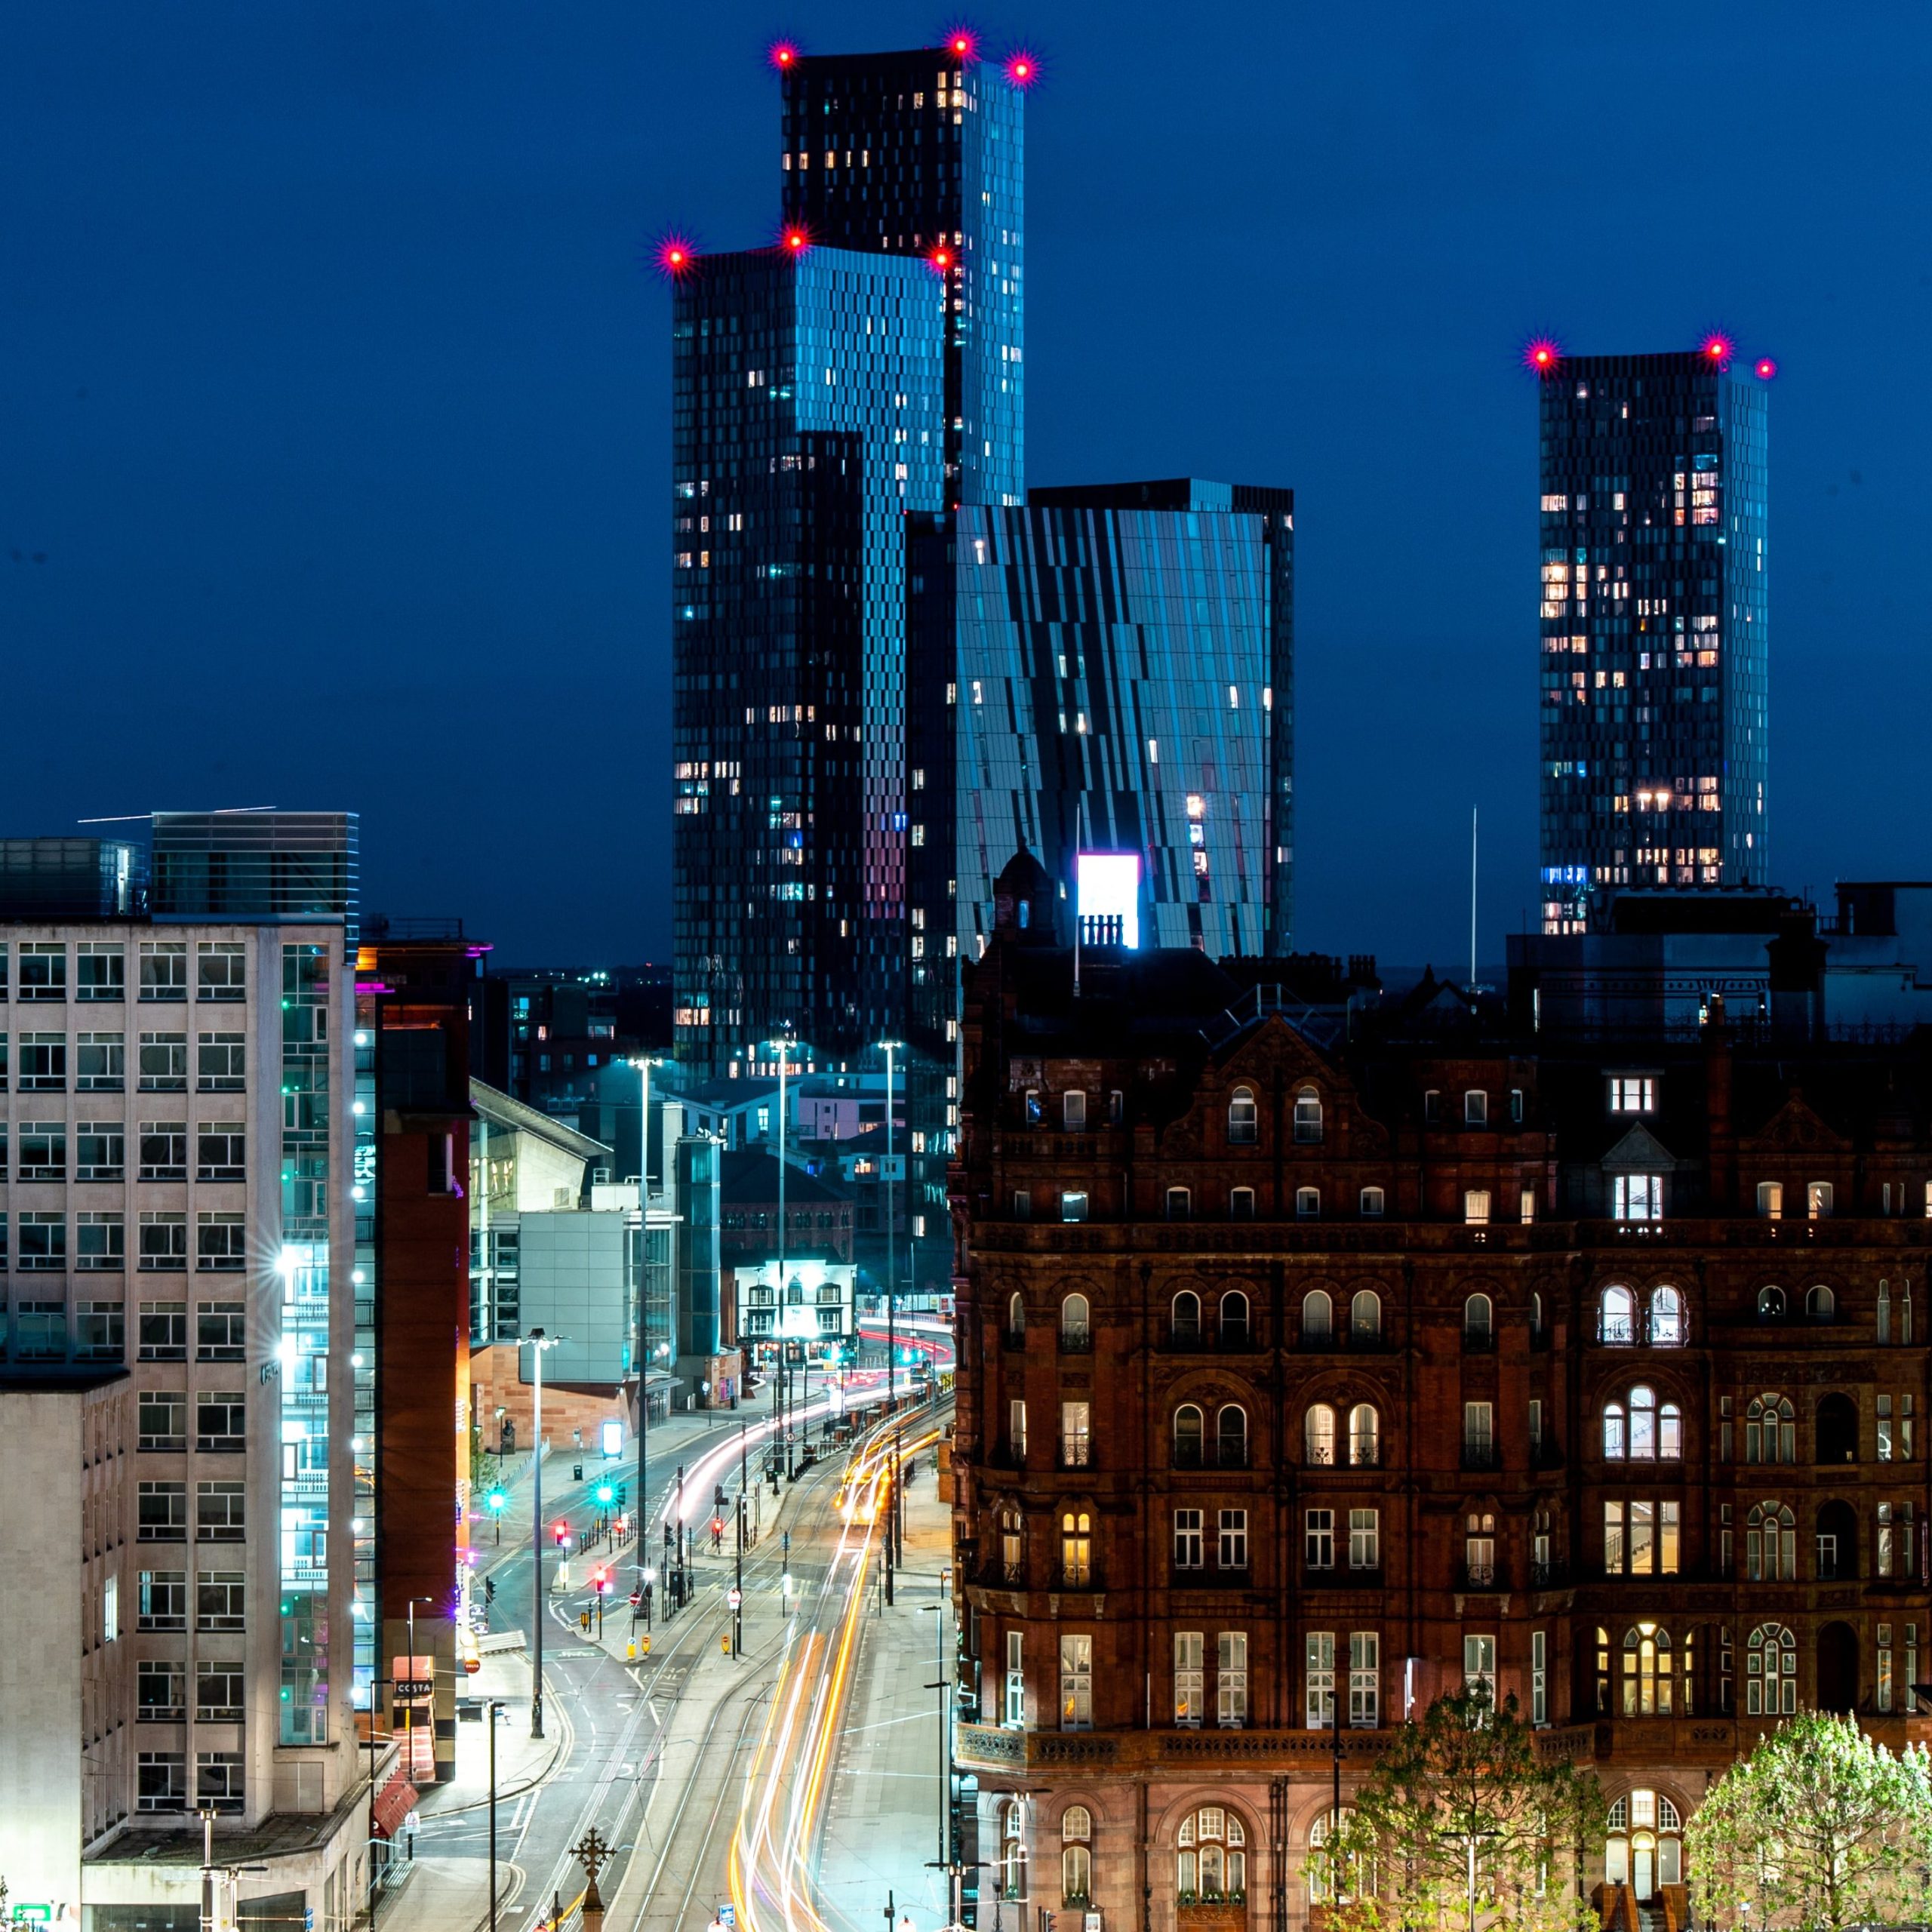 Manchester is one of the most affordable cities to live in, new research suggests, The Manc